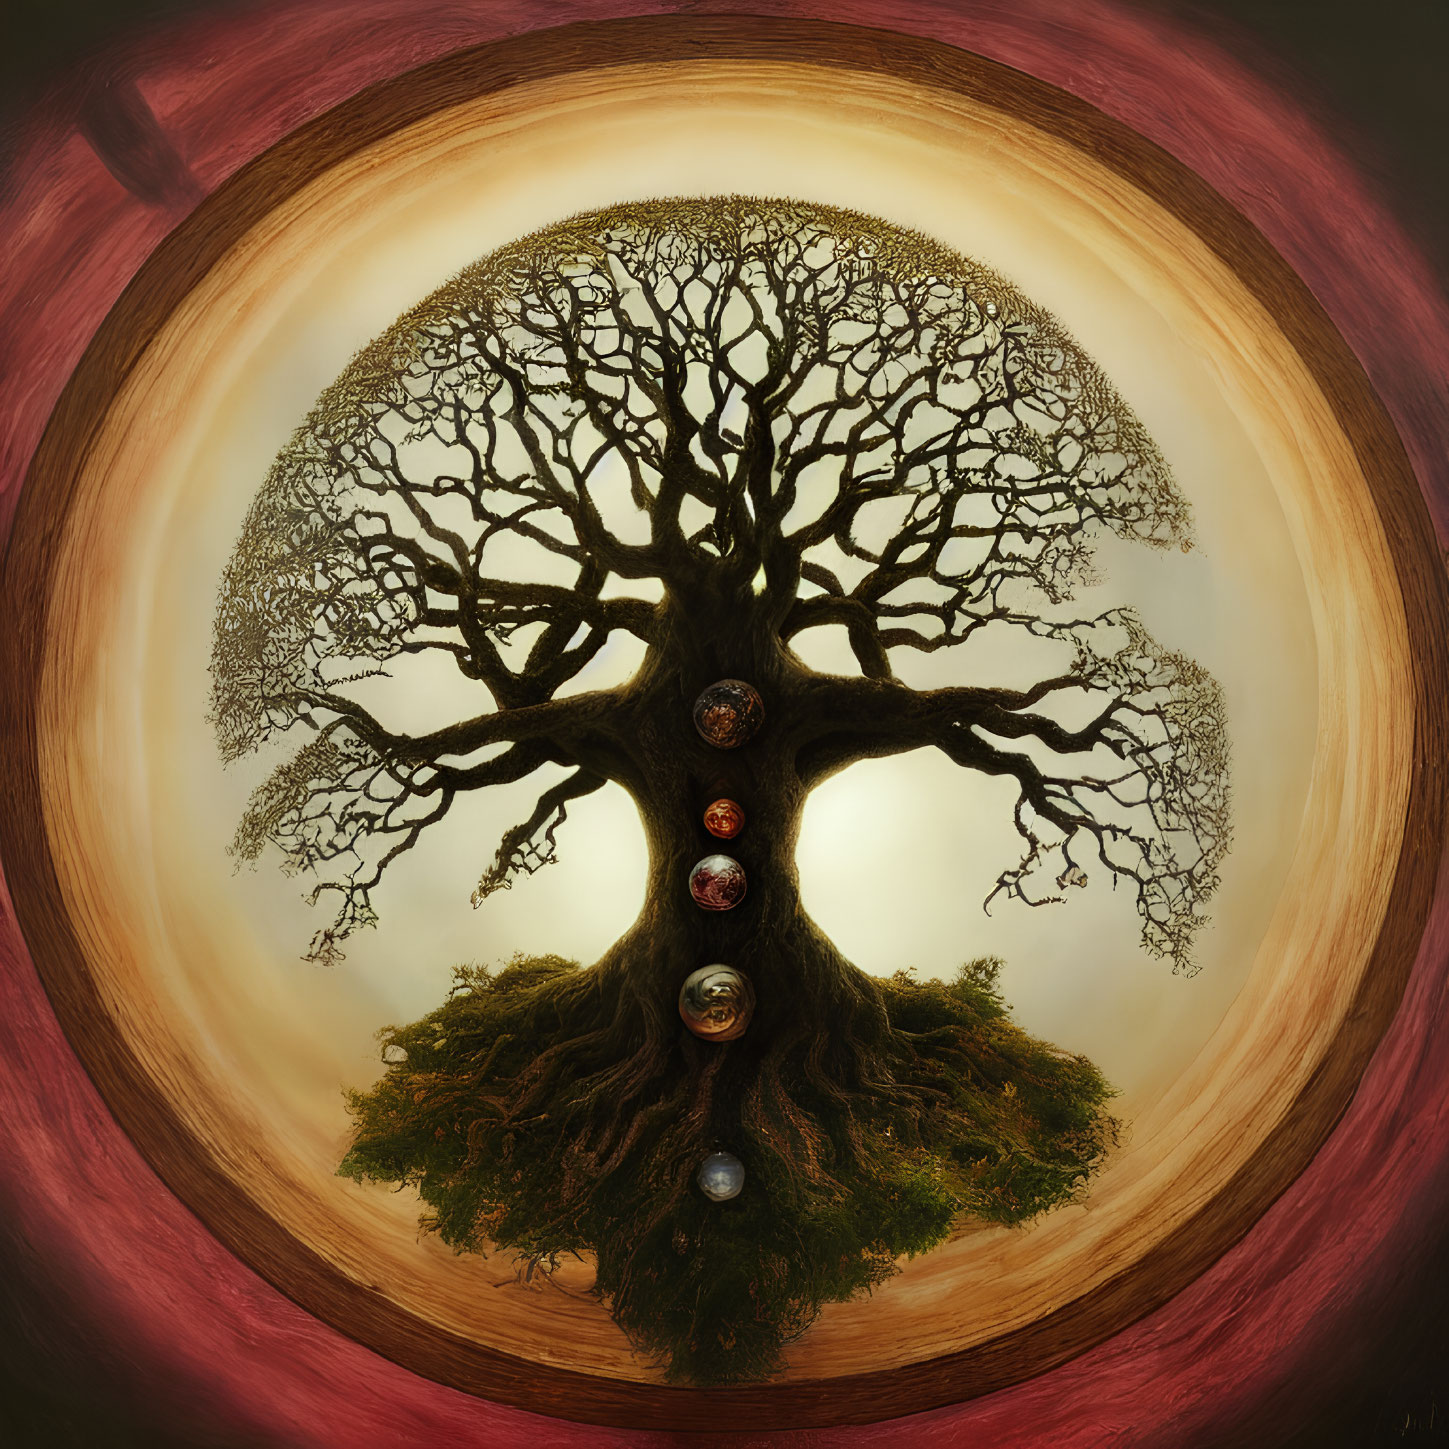 Circular surreal image of lone tree with intricate branches and concentric circles in brown, red, and yellow